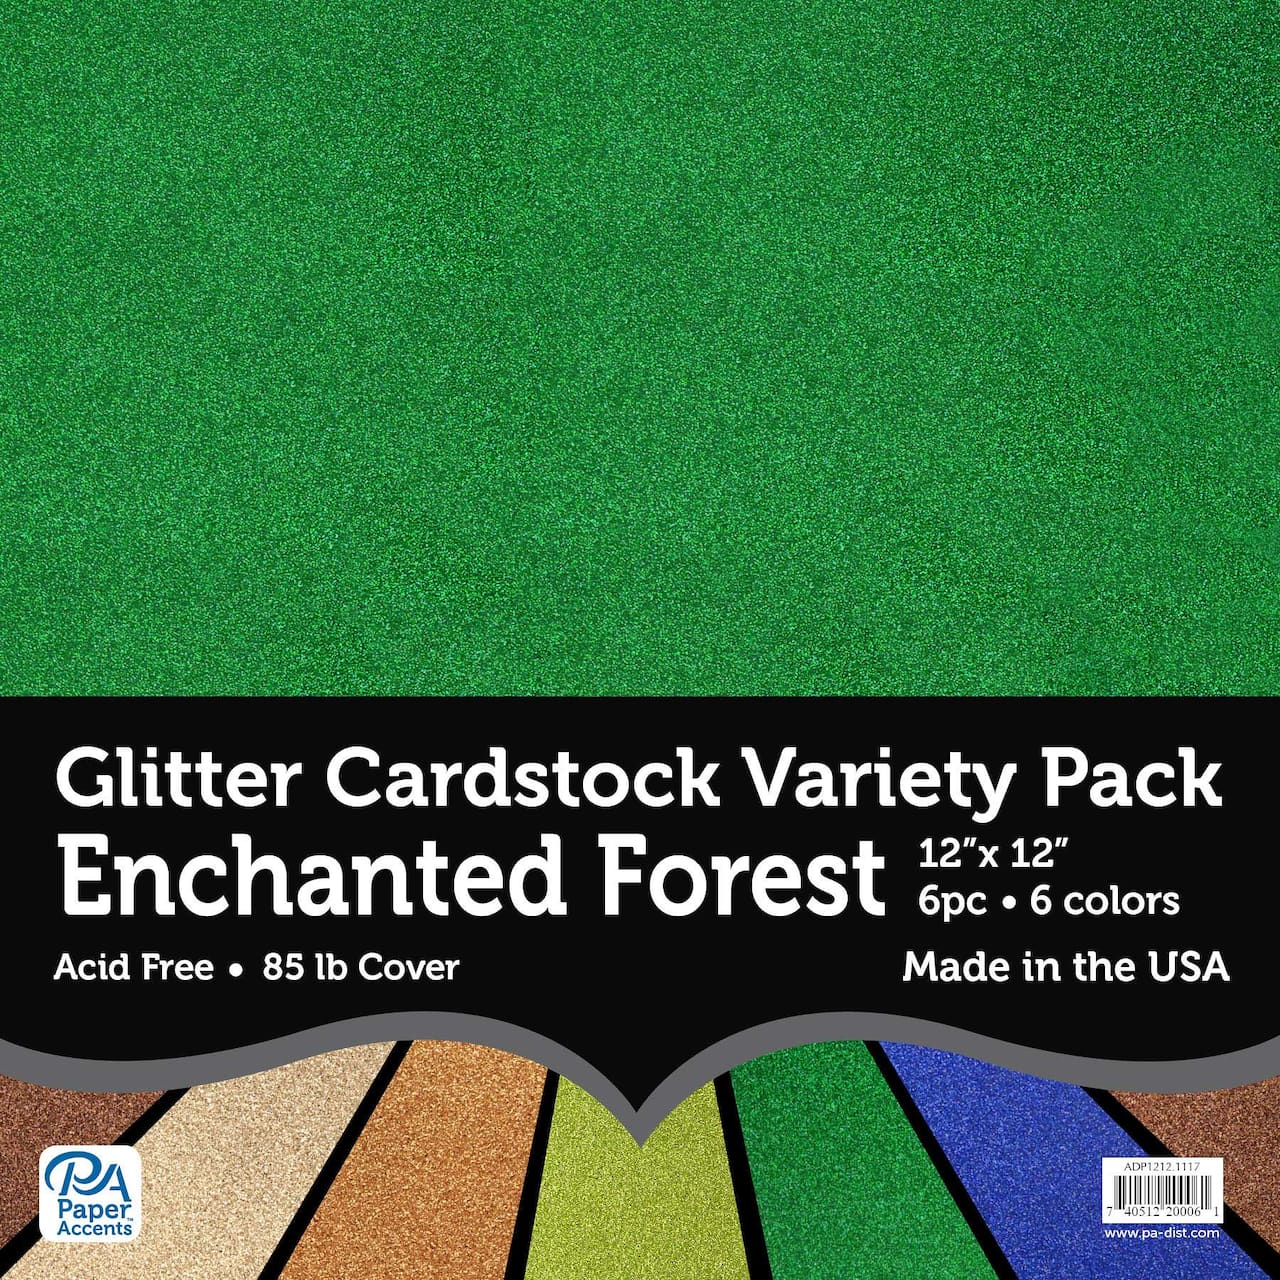 PA Paper™ Accents Enchanted Forest Glitter 12 x 12 Cardstock Variety Pack